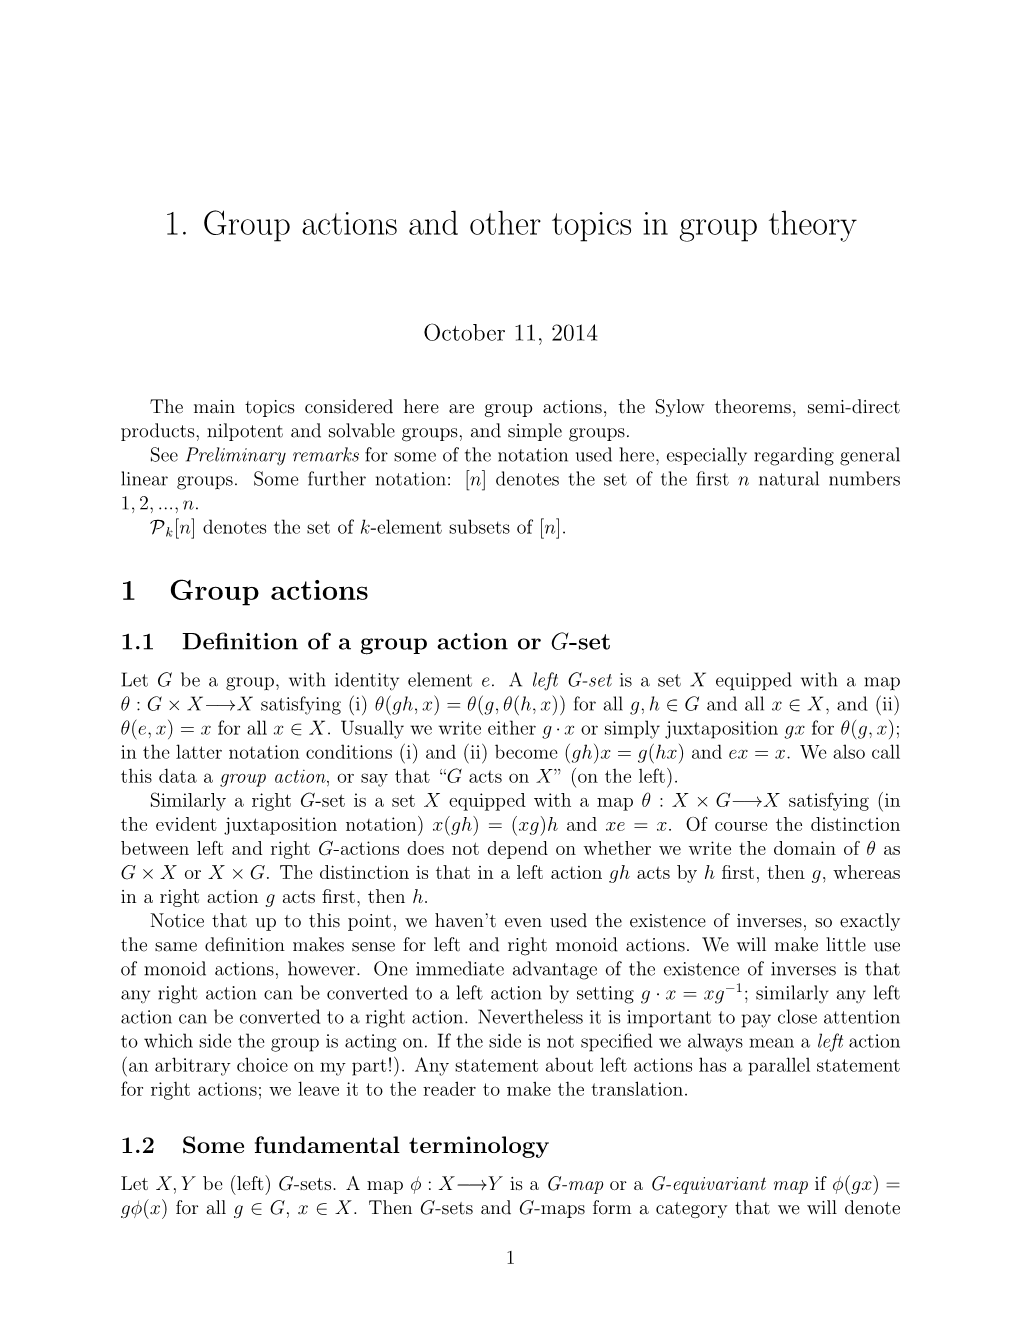 1. Group Actions and Other Topics in Group Theory